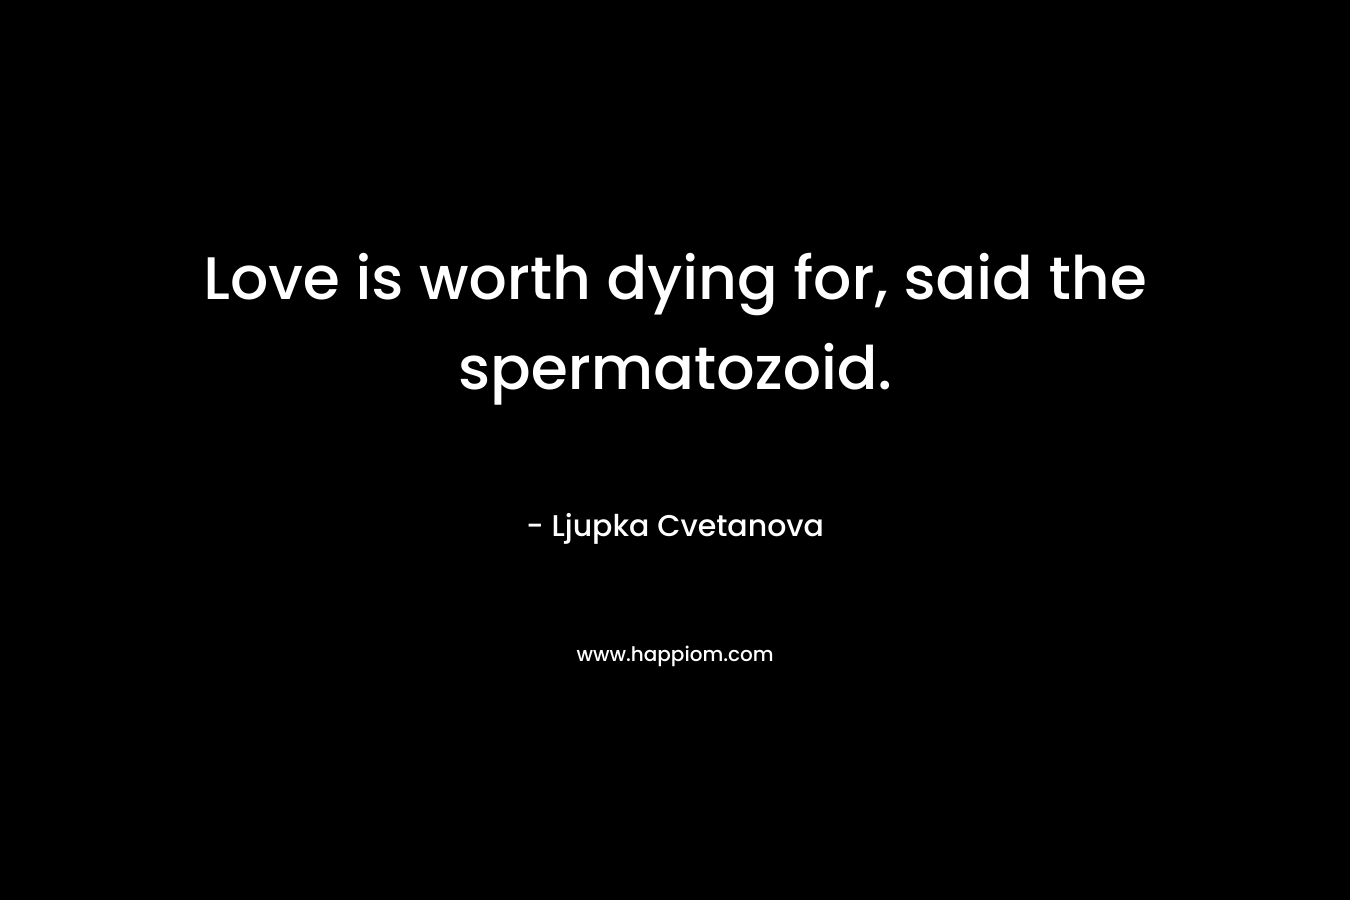 Love is worth dying for, said the spermatozoid.